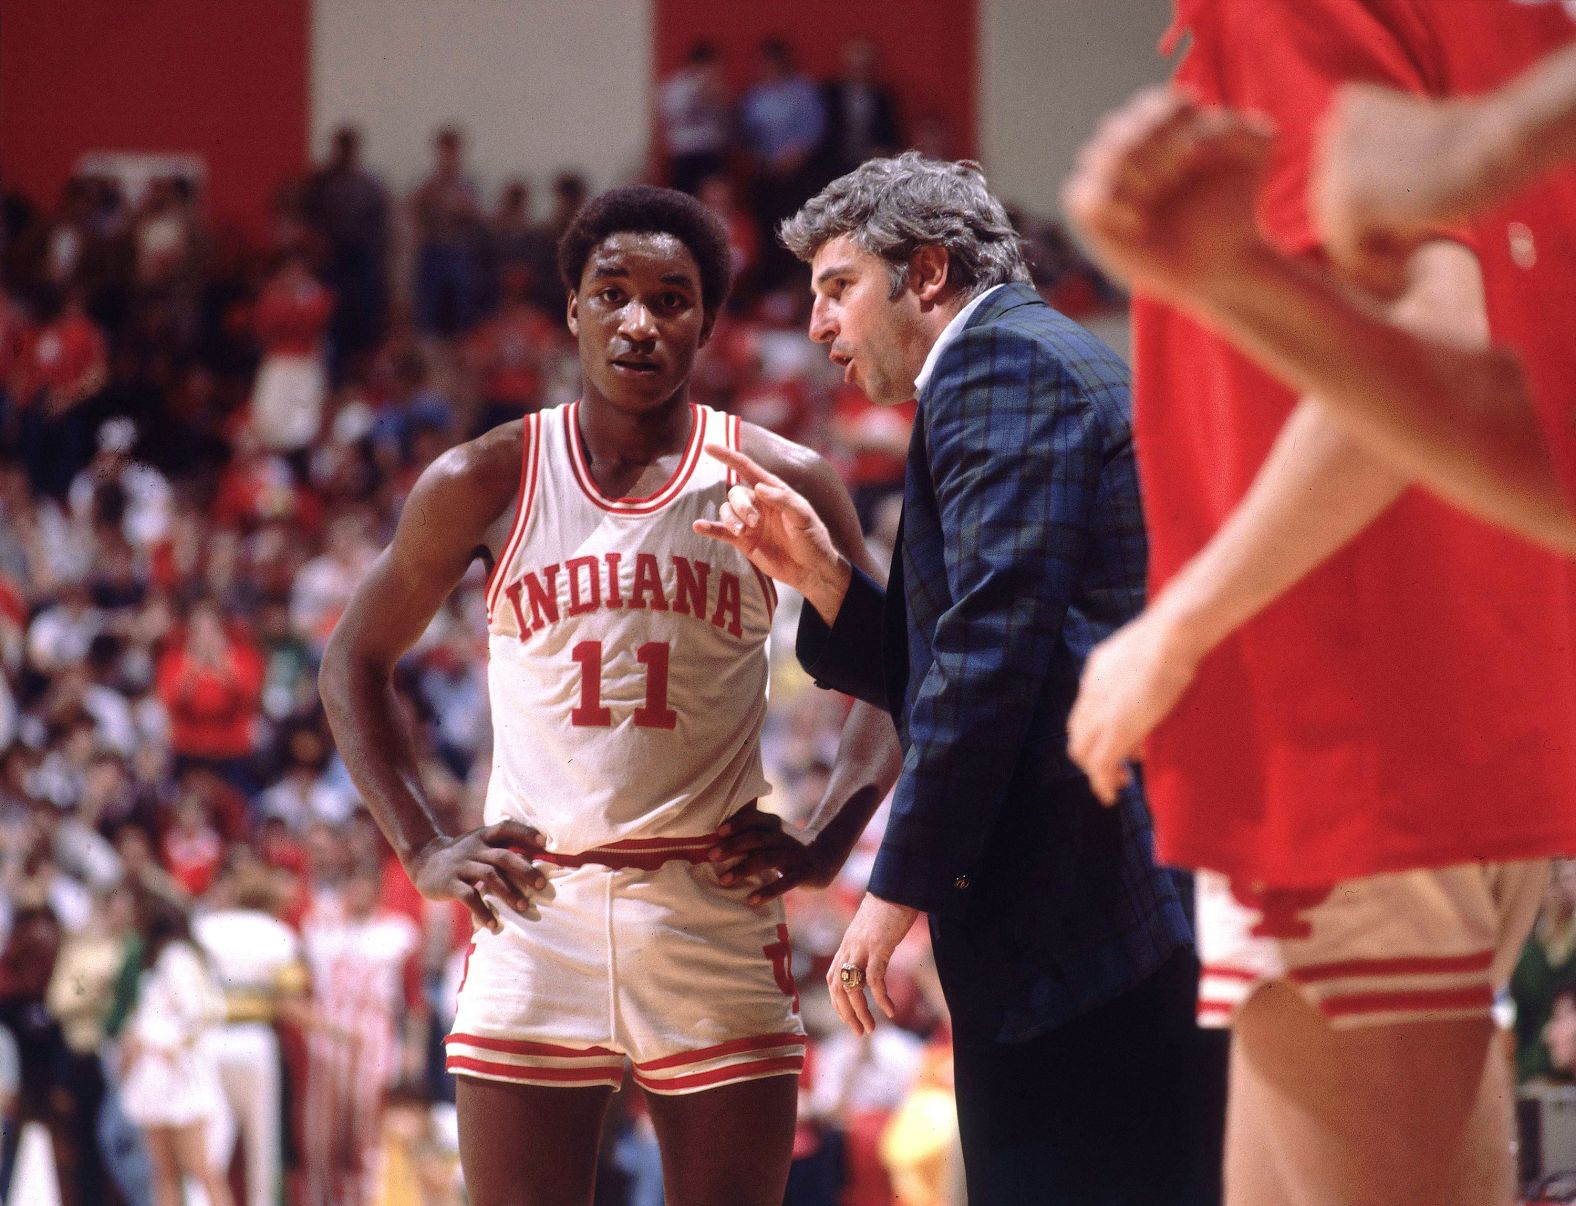 Knight talks to Indiana's Isiah Thomas on the sidelines during a game in 1981.